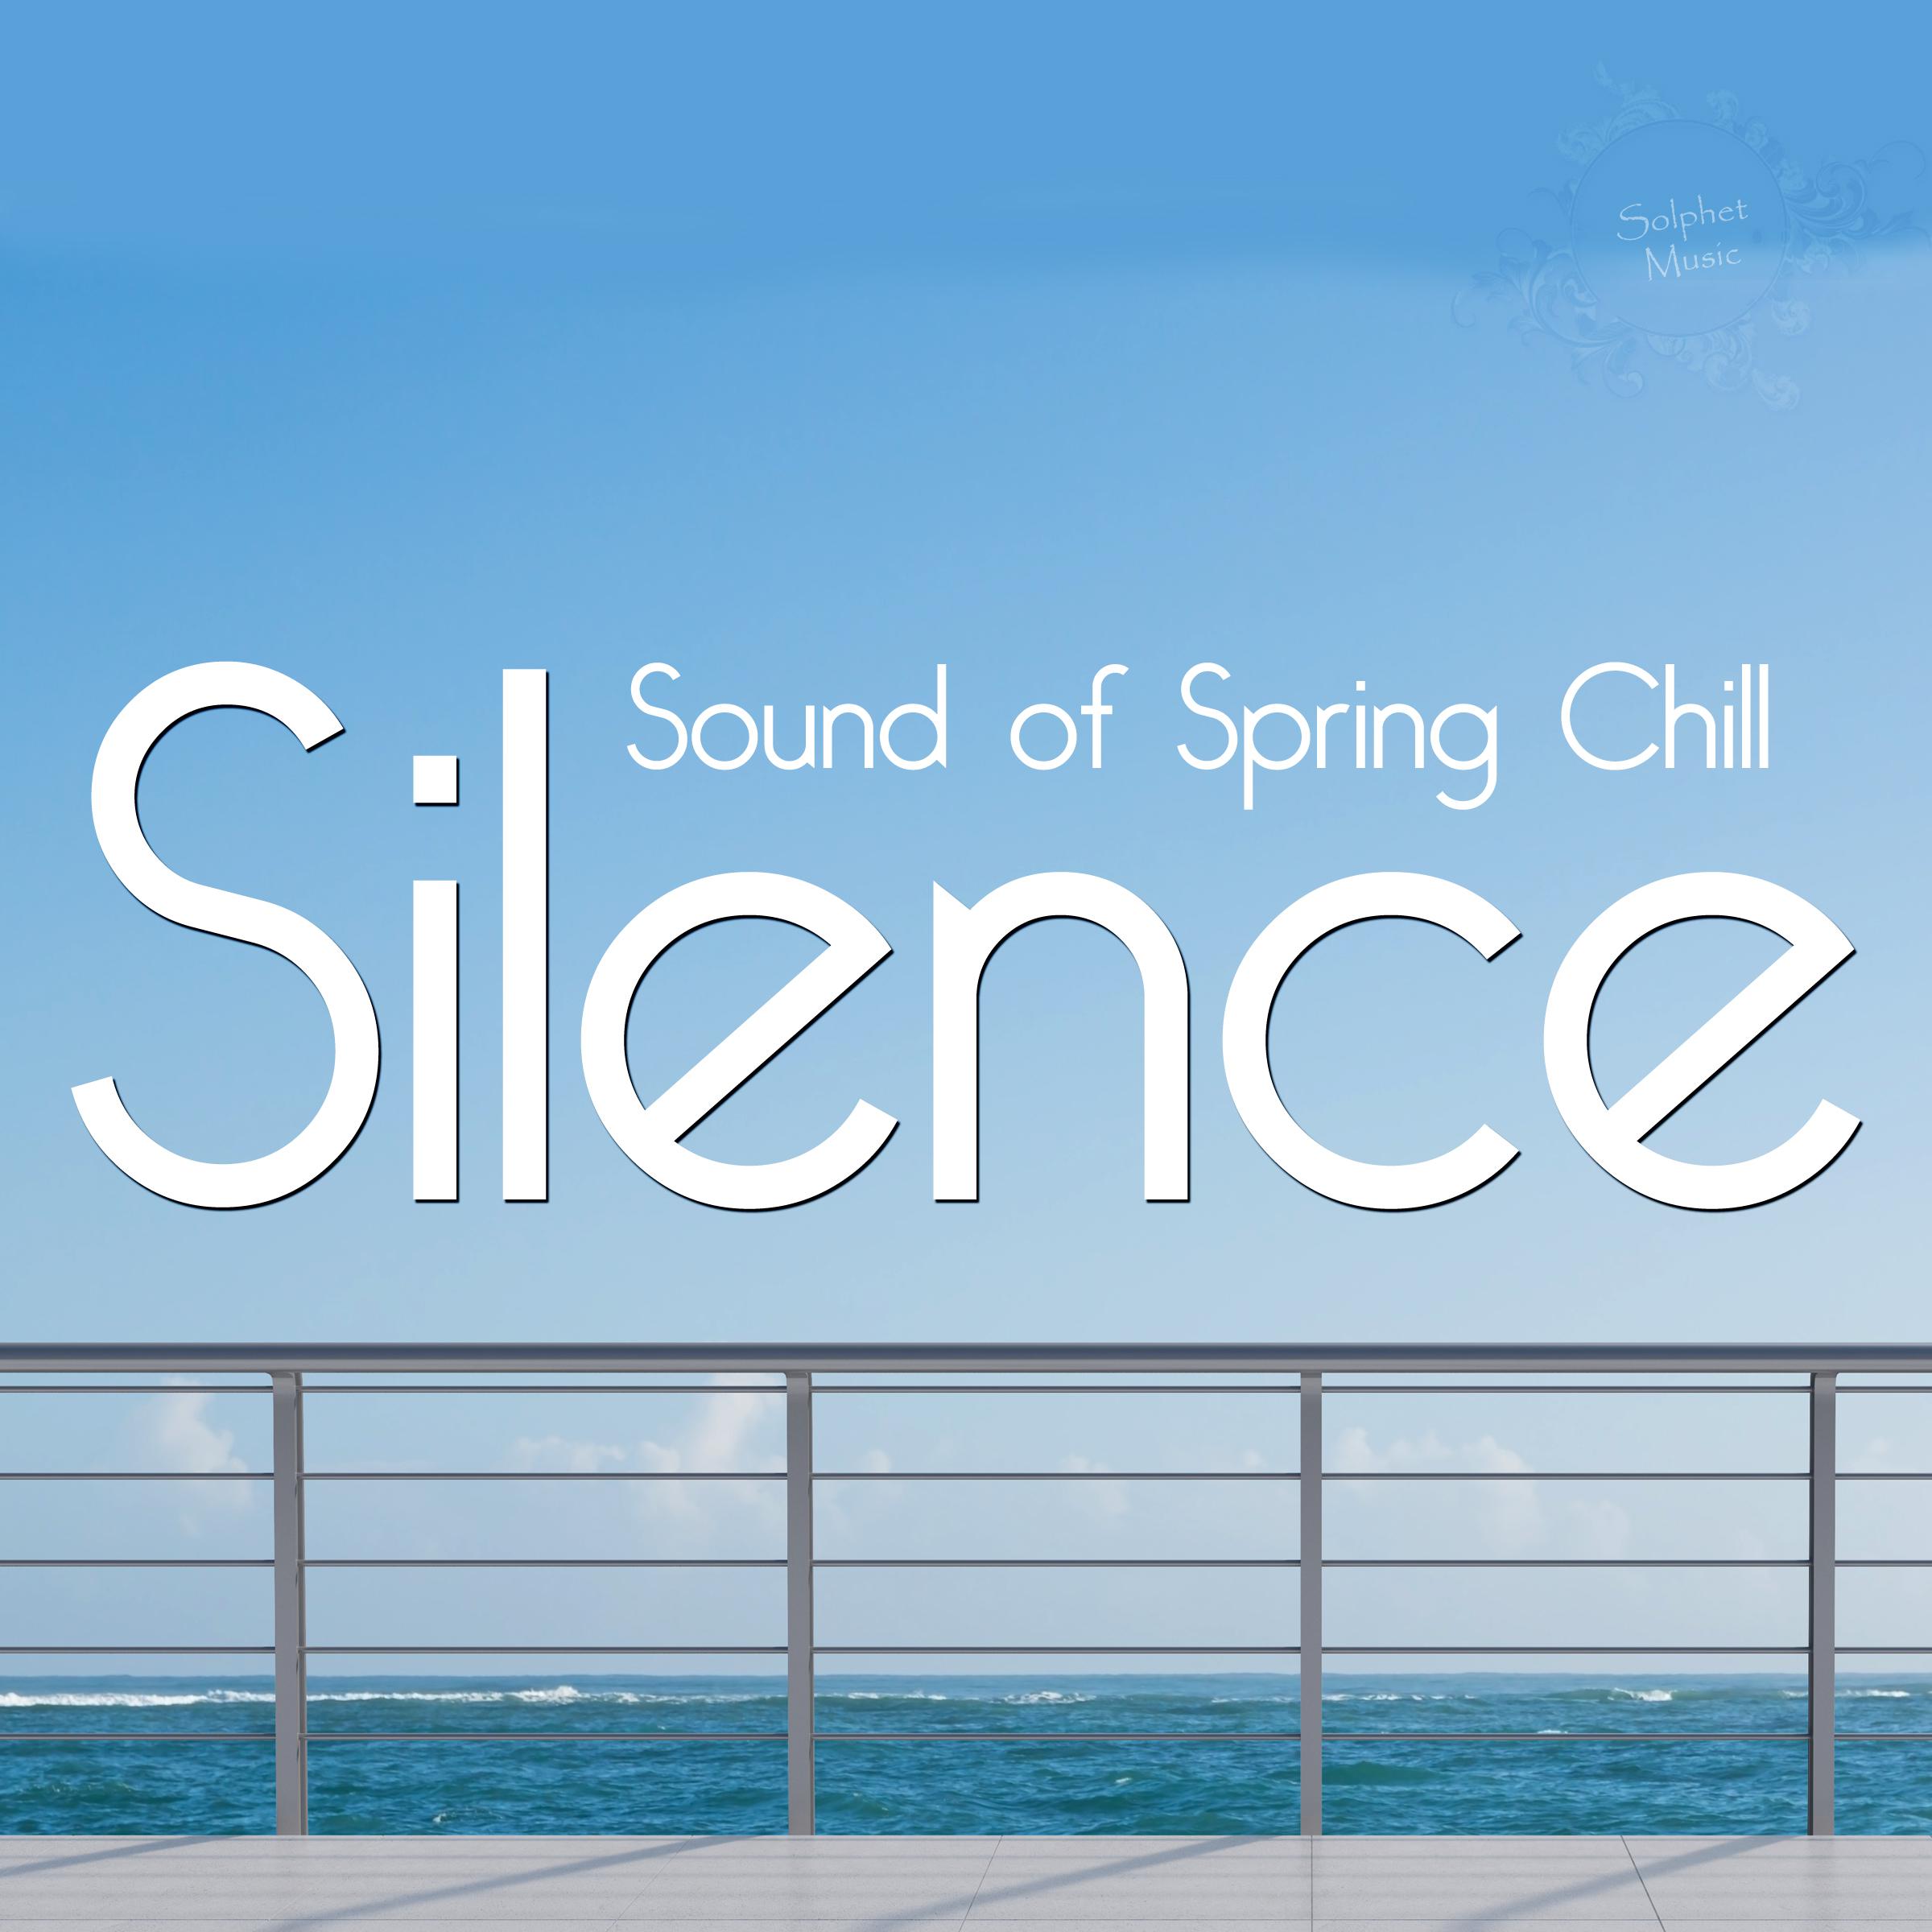 Silence - Sound of the Spring Chill